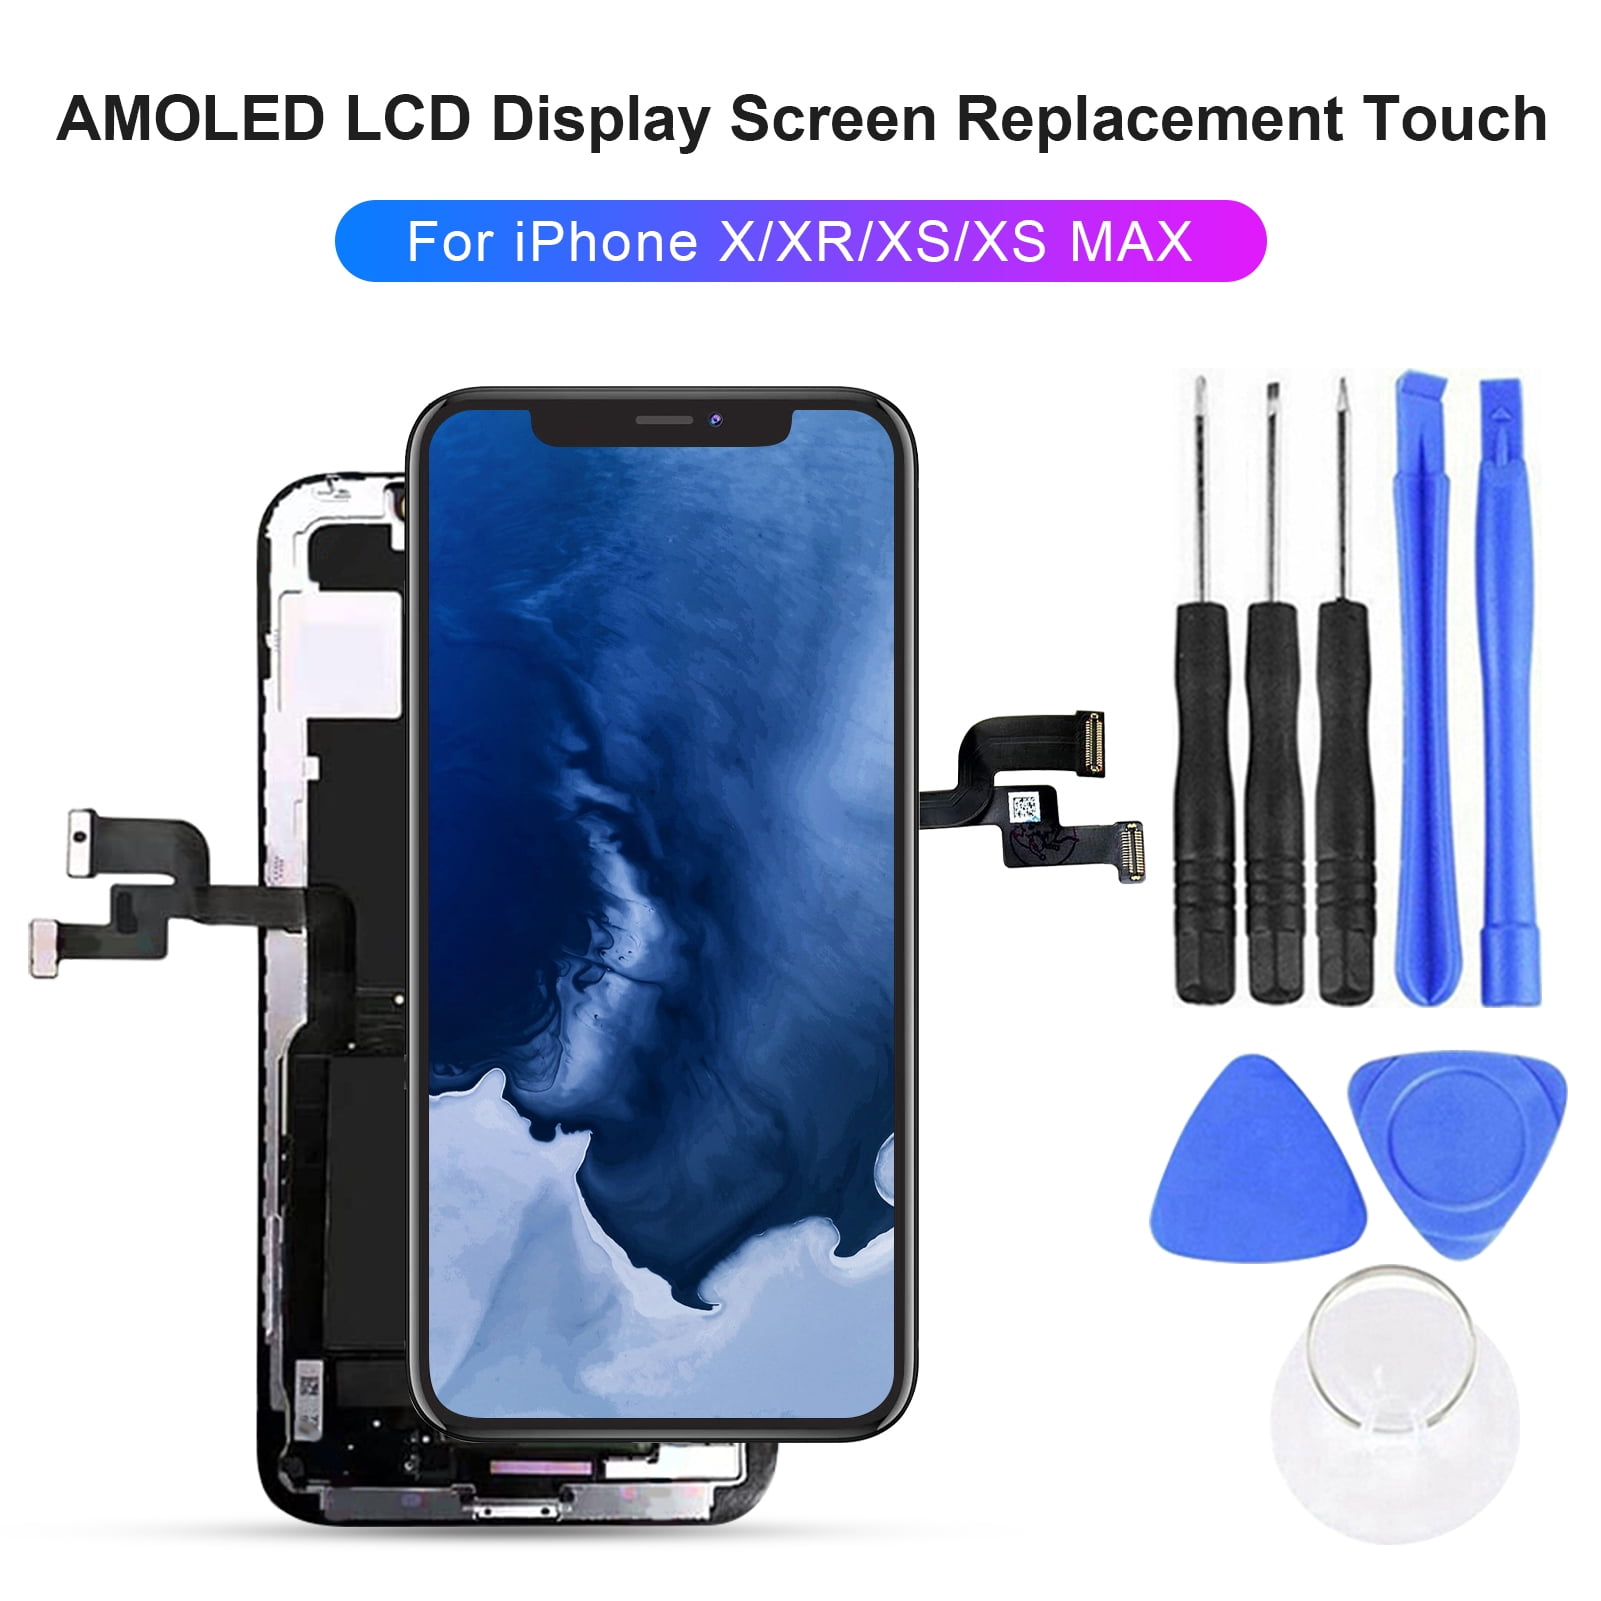 Sunnymall AMOLED LCD Display Screen Replacement with Touch